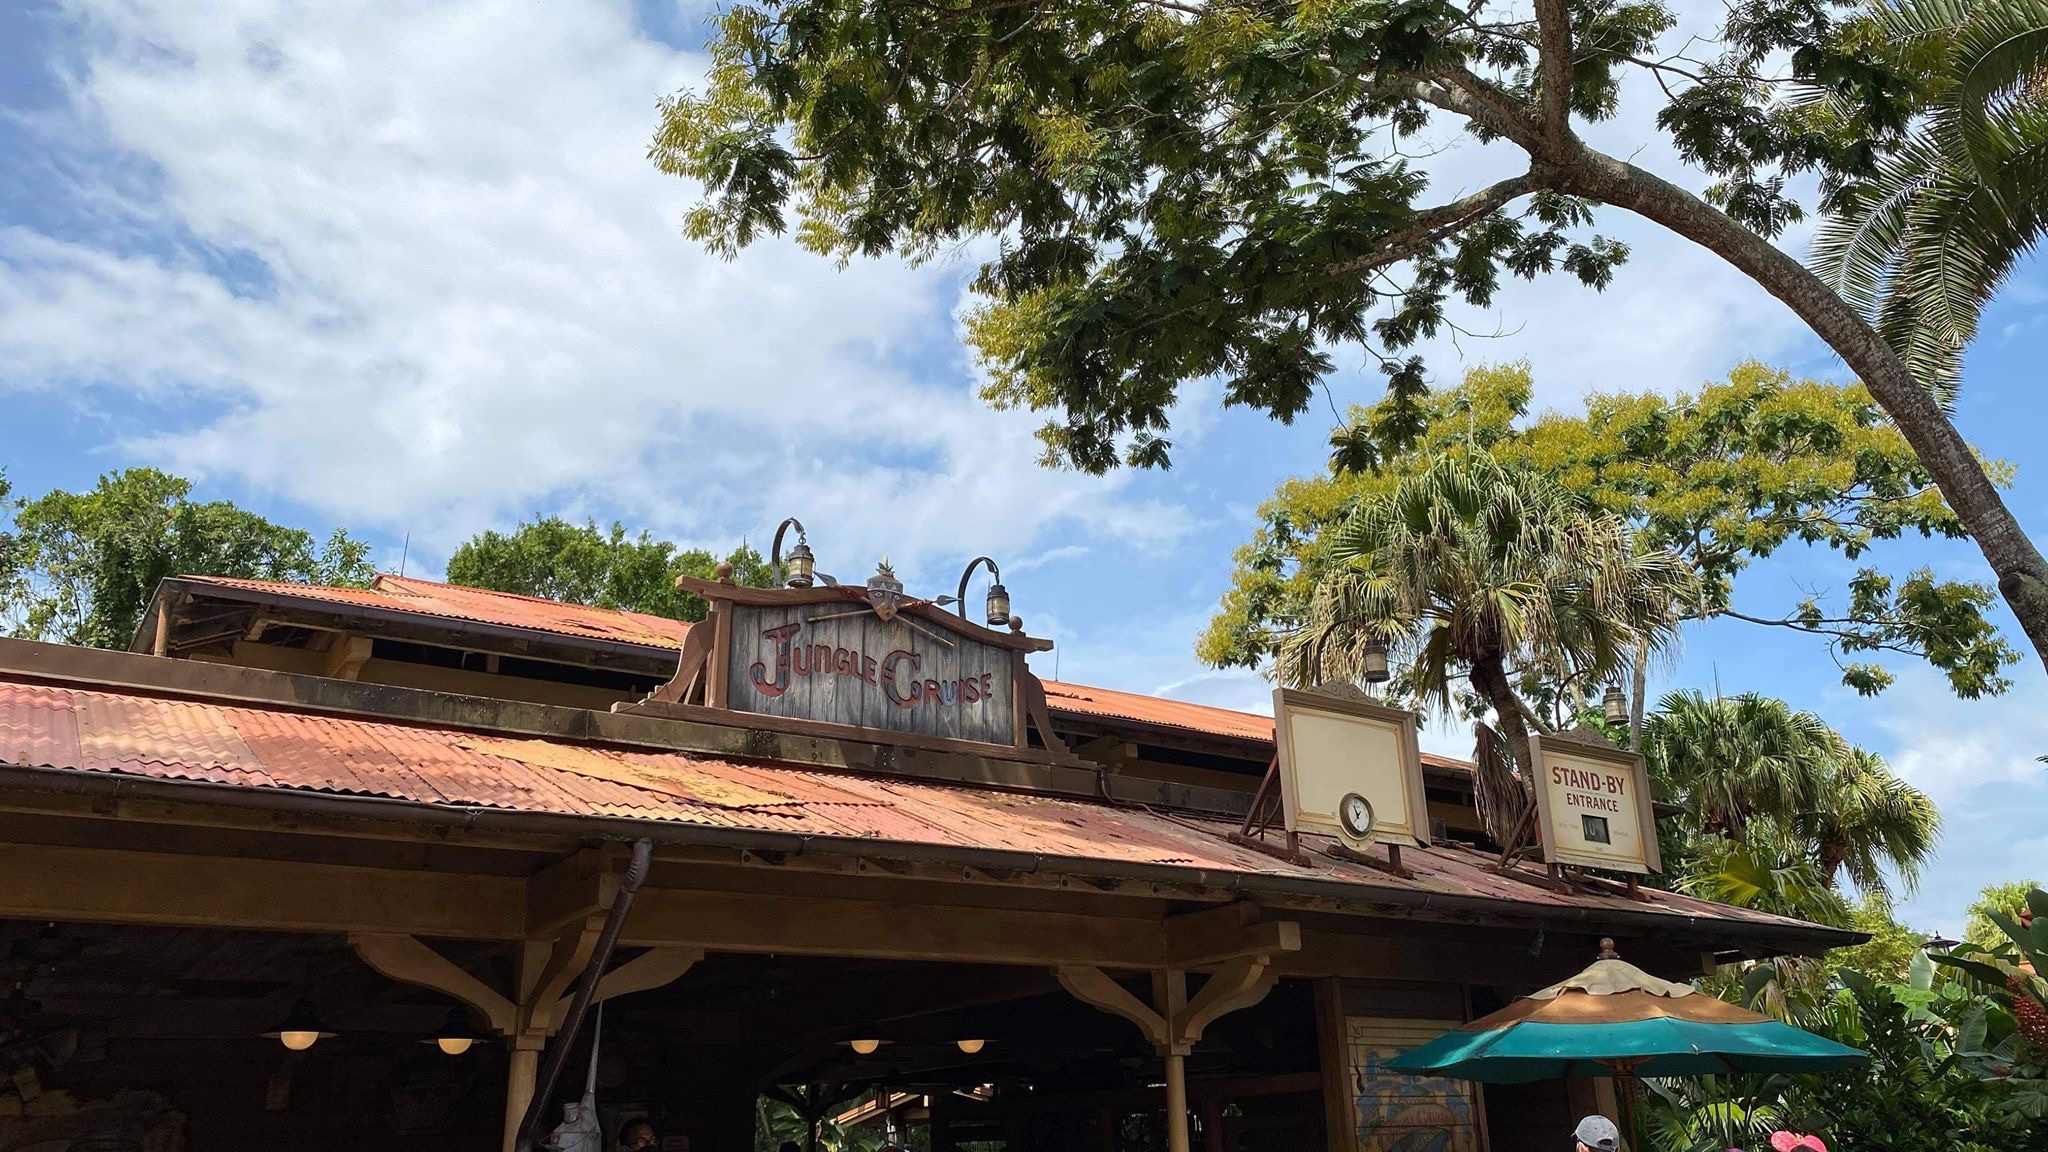 Social Distancing Measures In Place On The Jungle Cruise